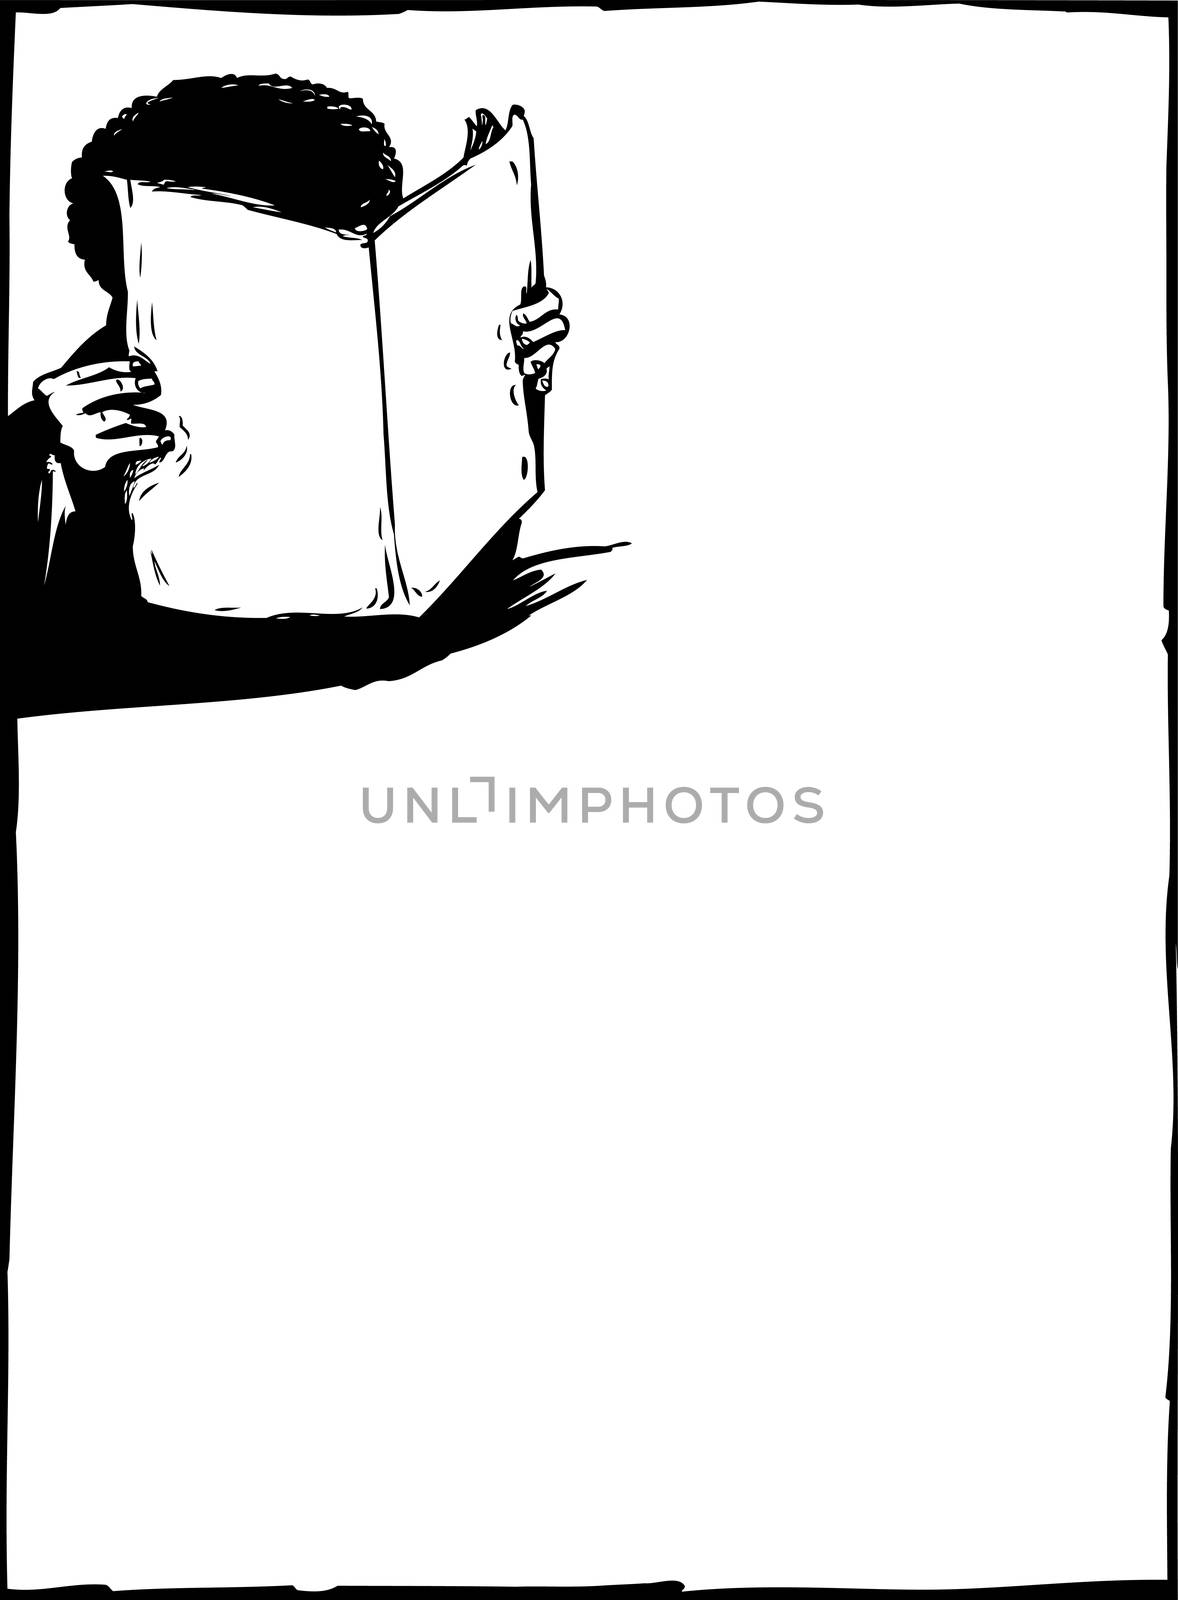 Outlined sketch of unidentifiable Black person reading a blank newspaper